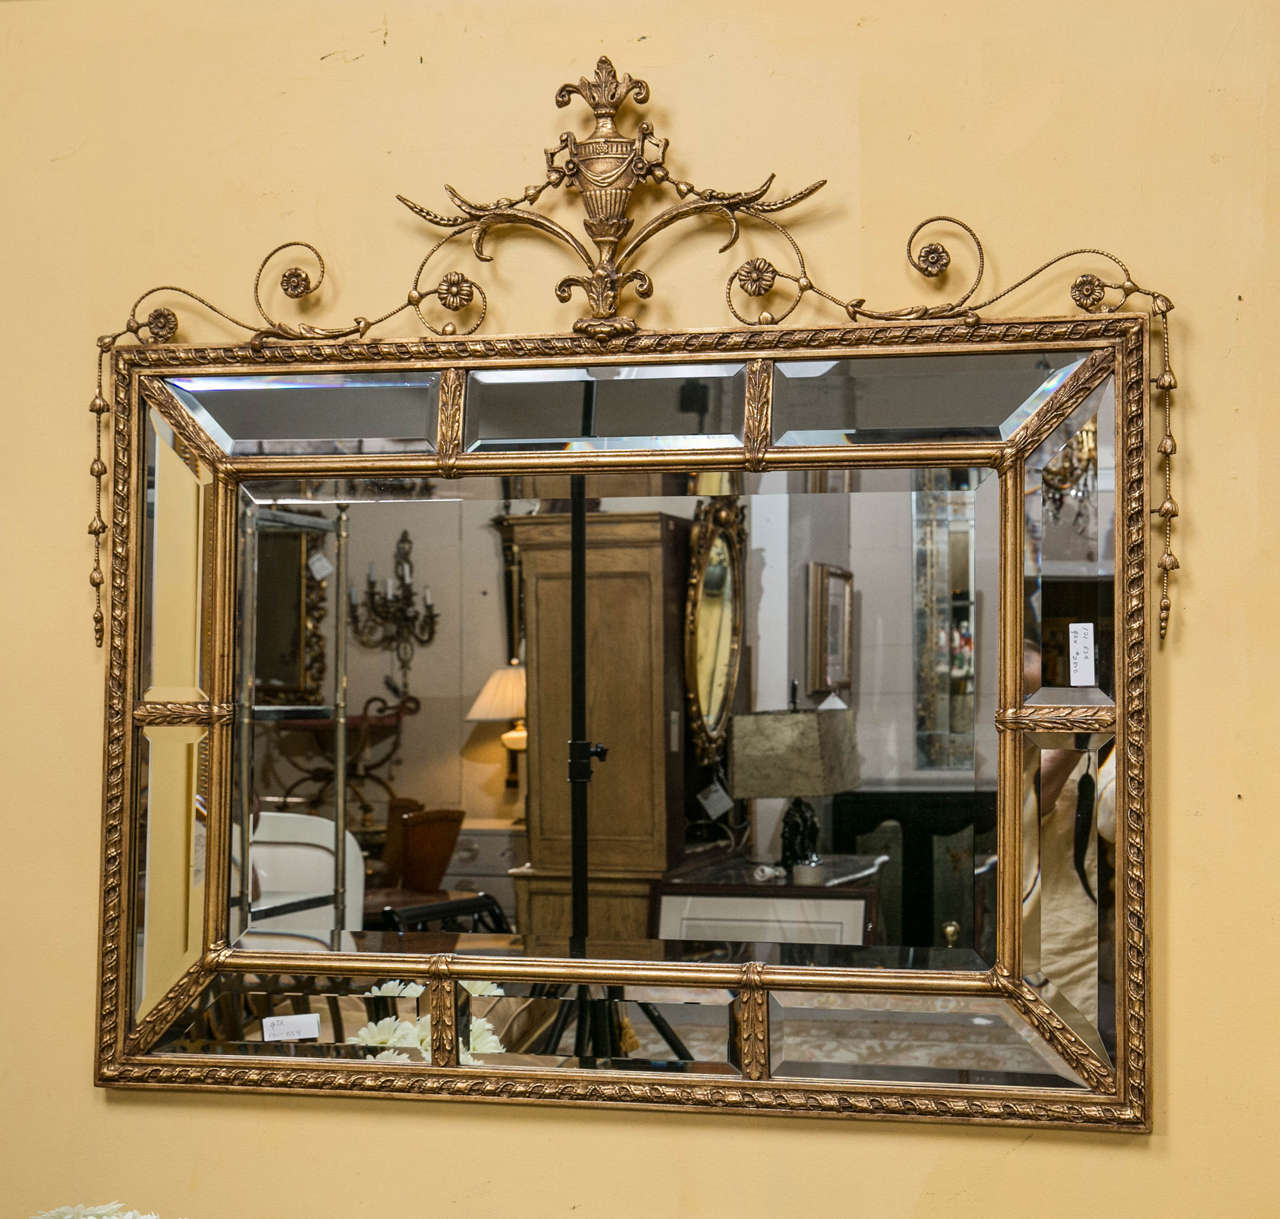 Adams style beveled mirror in a finely carved frame. The central beveled mirror flanked by a group of ten beveled framed mirrors set in a wooden carved and gilt border. The outer wooden carved and gilt border terminating in a wonderfully decorative